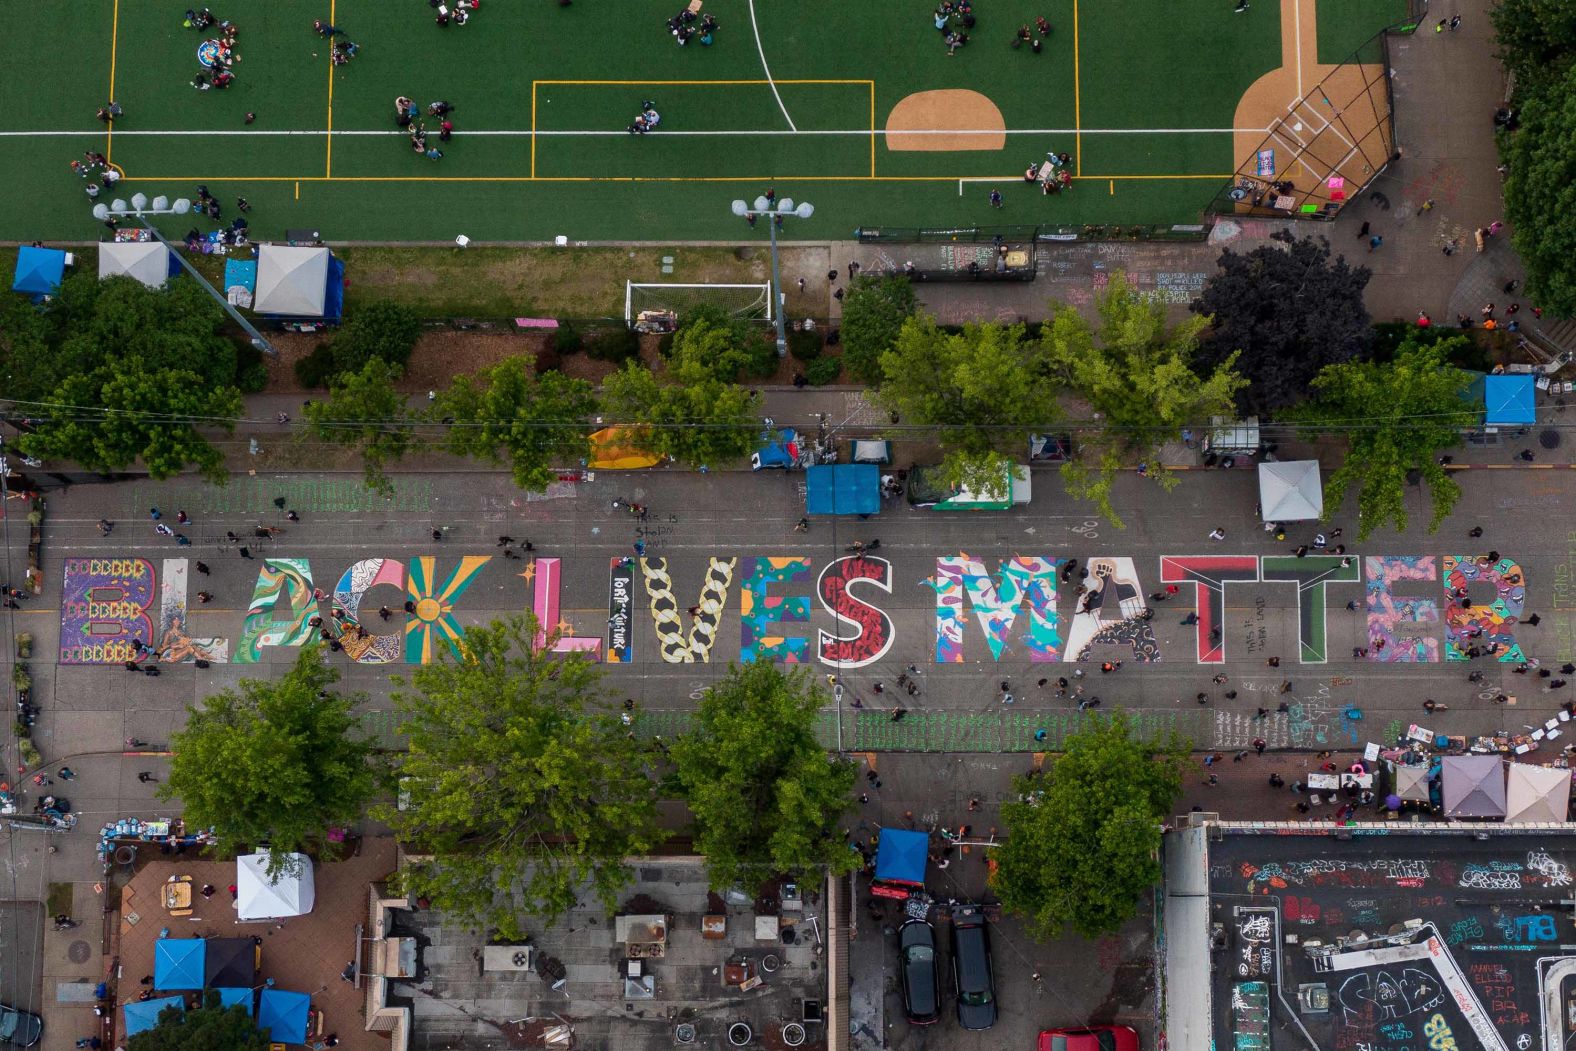 This aerial photo shows a Black Lives Matter mural in Seattle on June 14. Barricades and street graffiti mark the entrance to what's known as Seattle's Capitol Hill Autonomous Zone, which <a href="index.php?page=&url=https%3A%2F%2Fwww.cnn.com%2F2020%2F06%2F15%2Fus%2Fseattle-capitol-hill-autonomous-zone-monday%2Findex.html" target="_blank">protesters have occupied</a> since June 7.